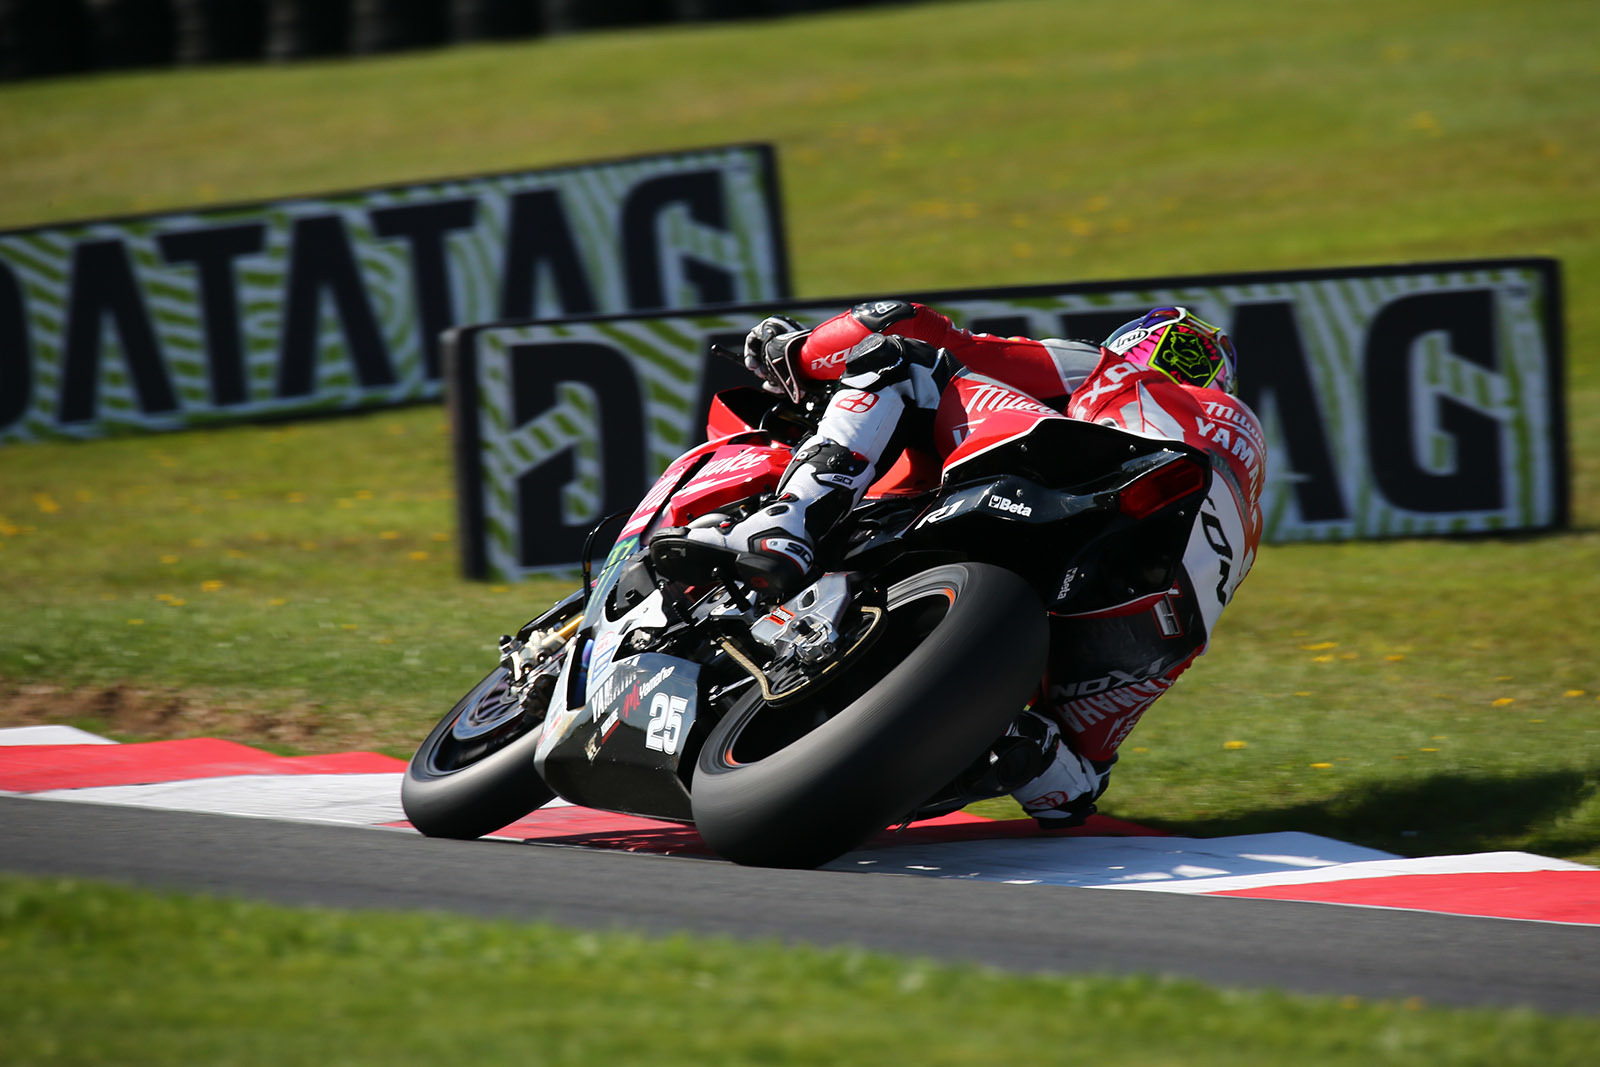 Brookes Takes 47 Point Bsb Championship Lead Into Tripleheader Finale At Brands Hatch